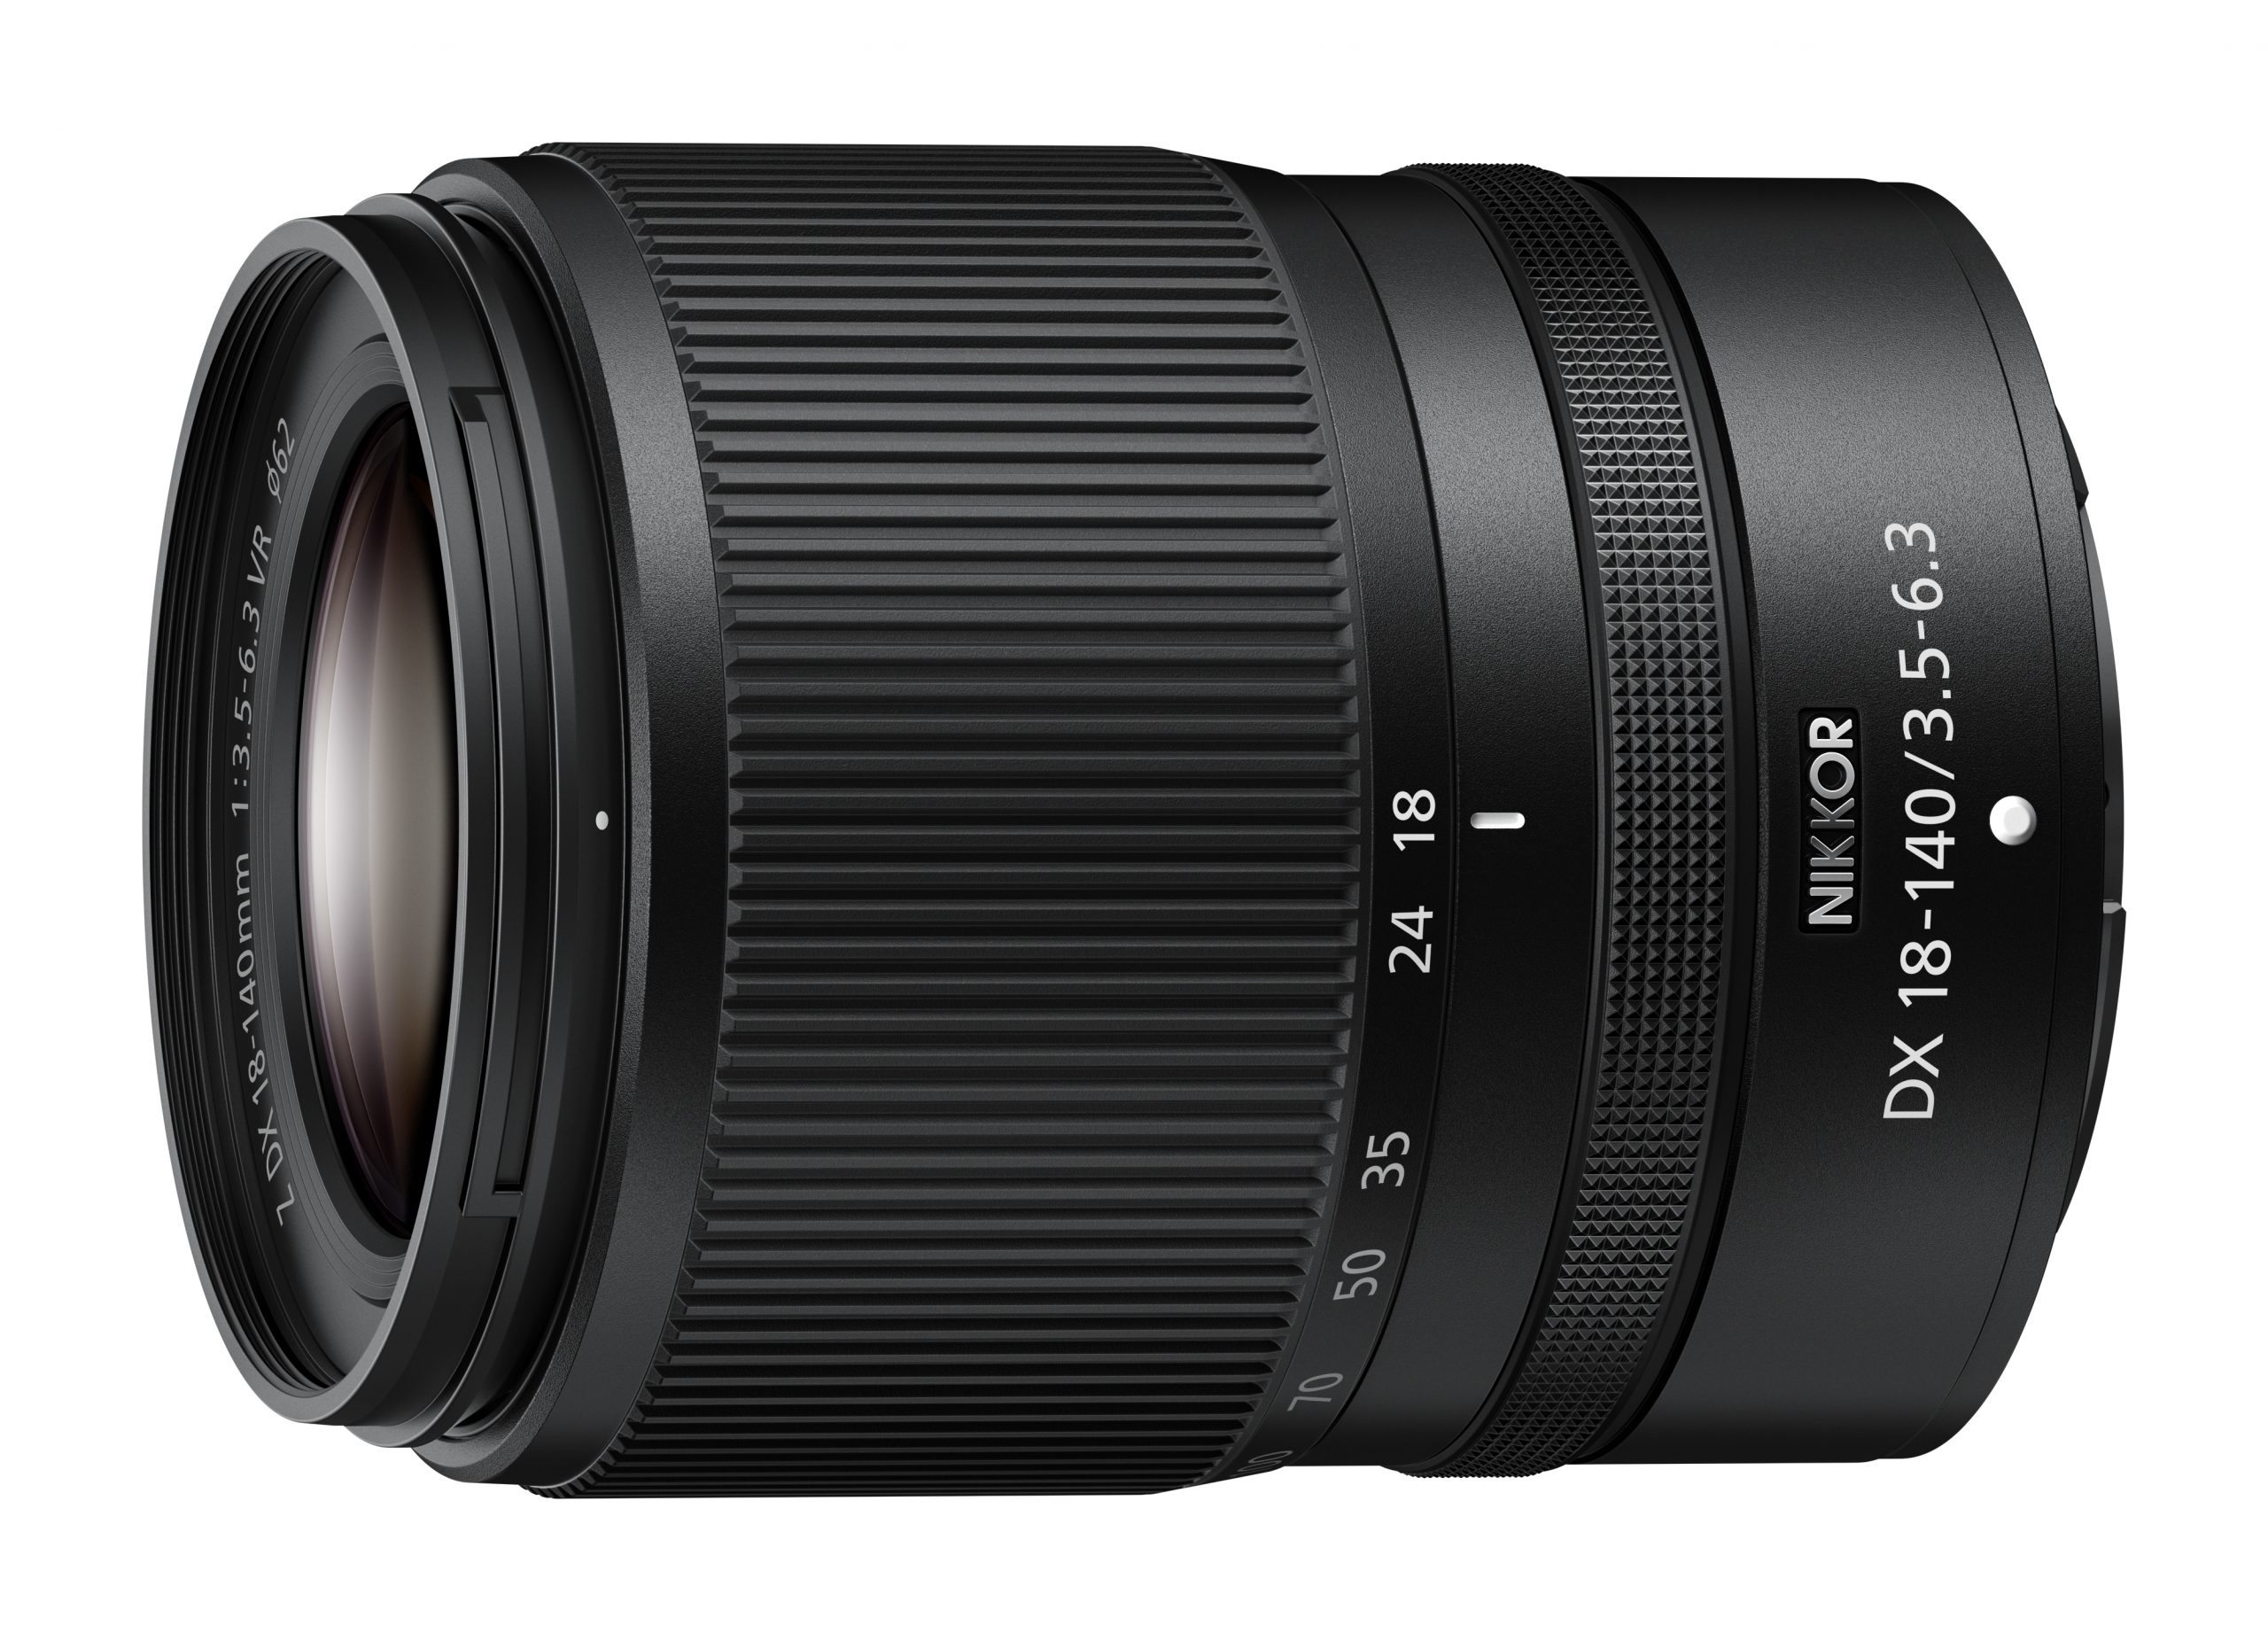 A product shot of the Nikon NIKKOR Z DX Telephoto Zoom Lens